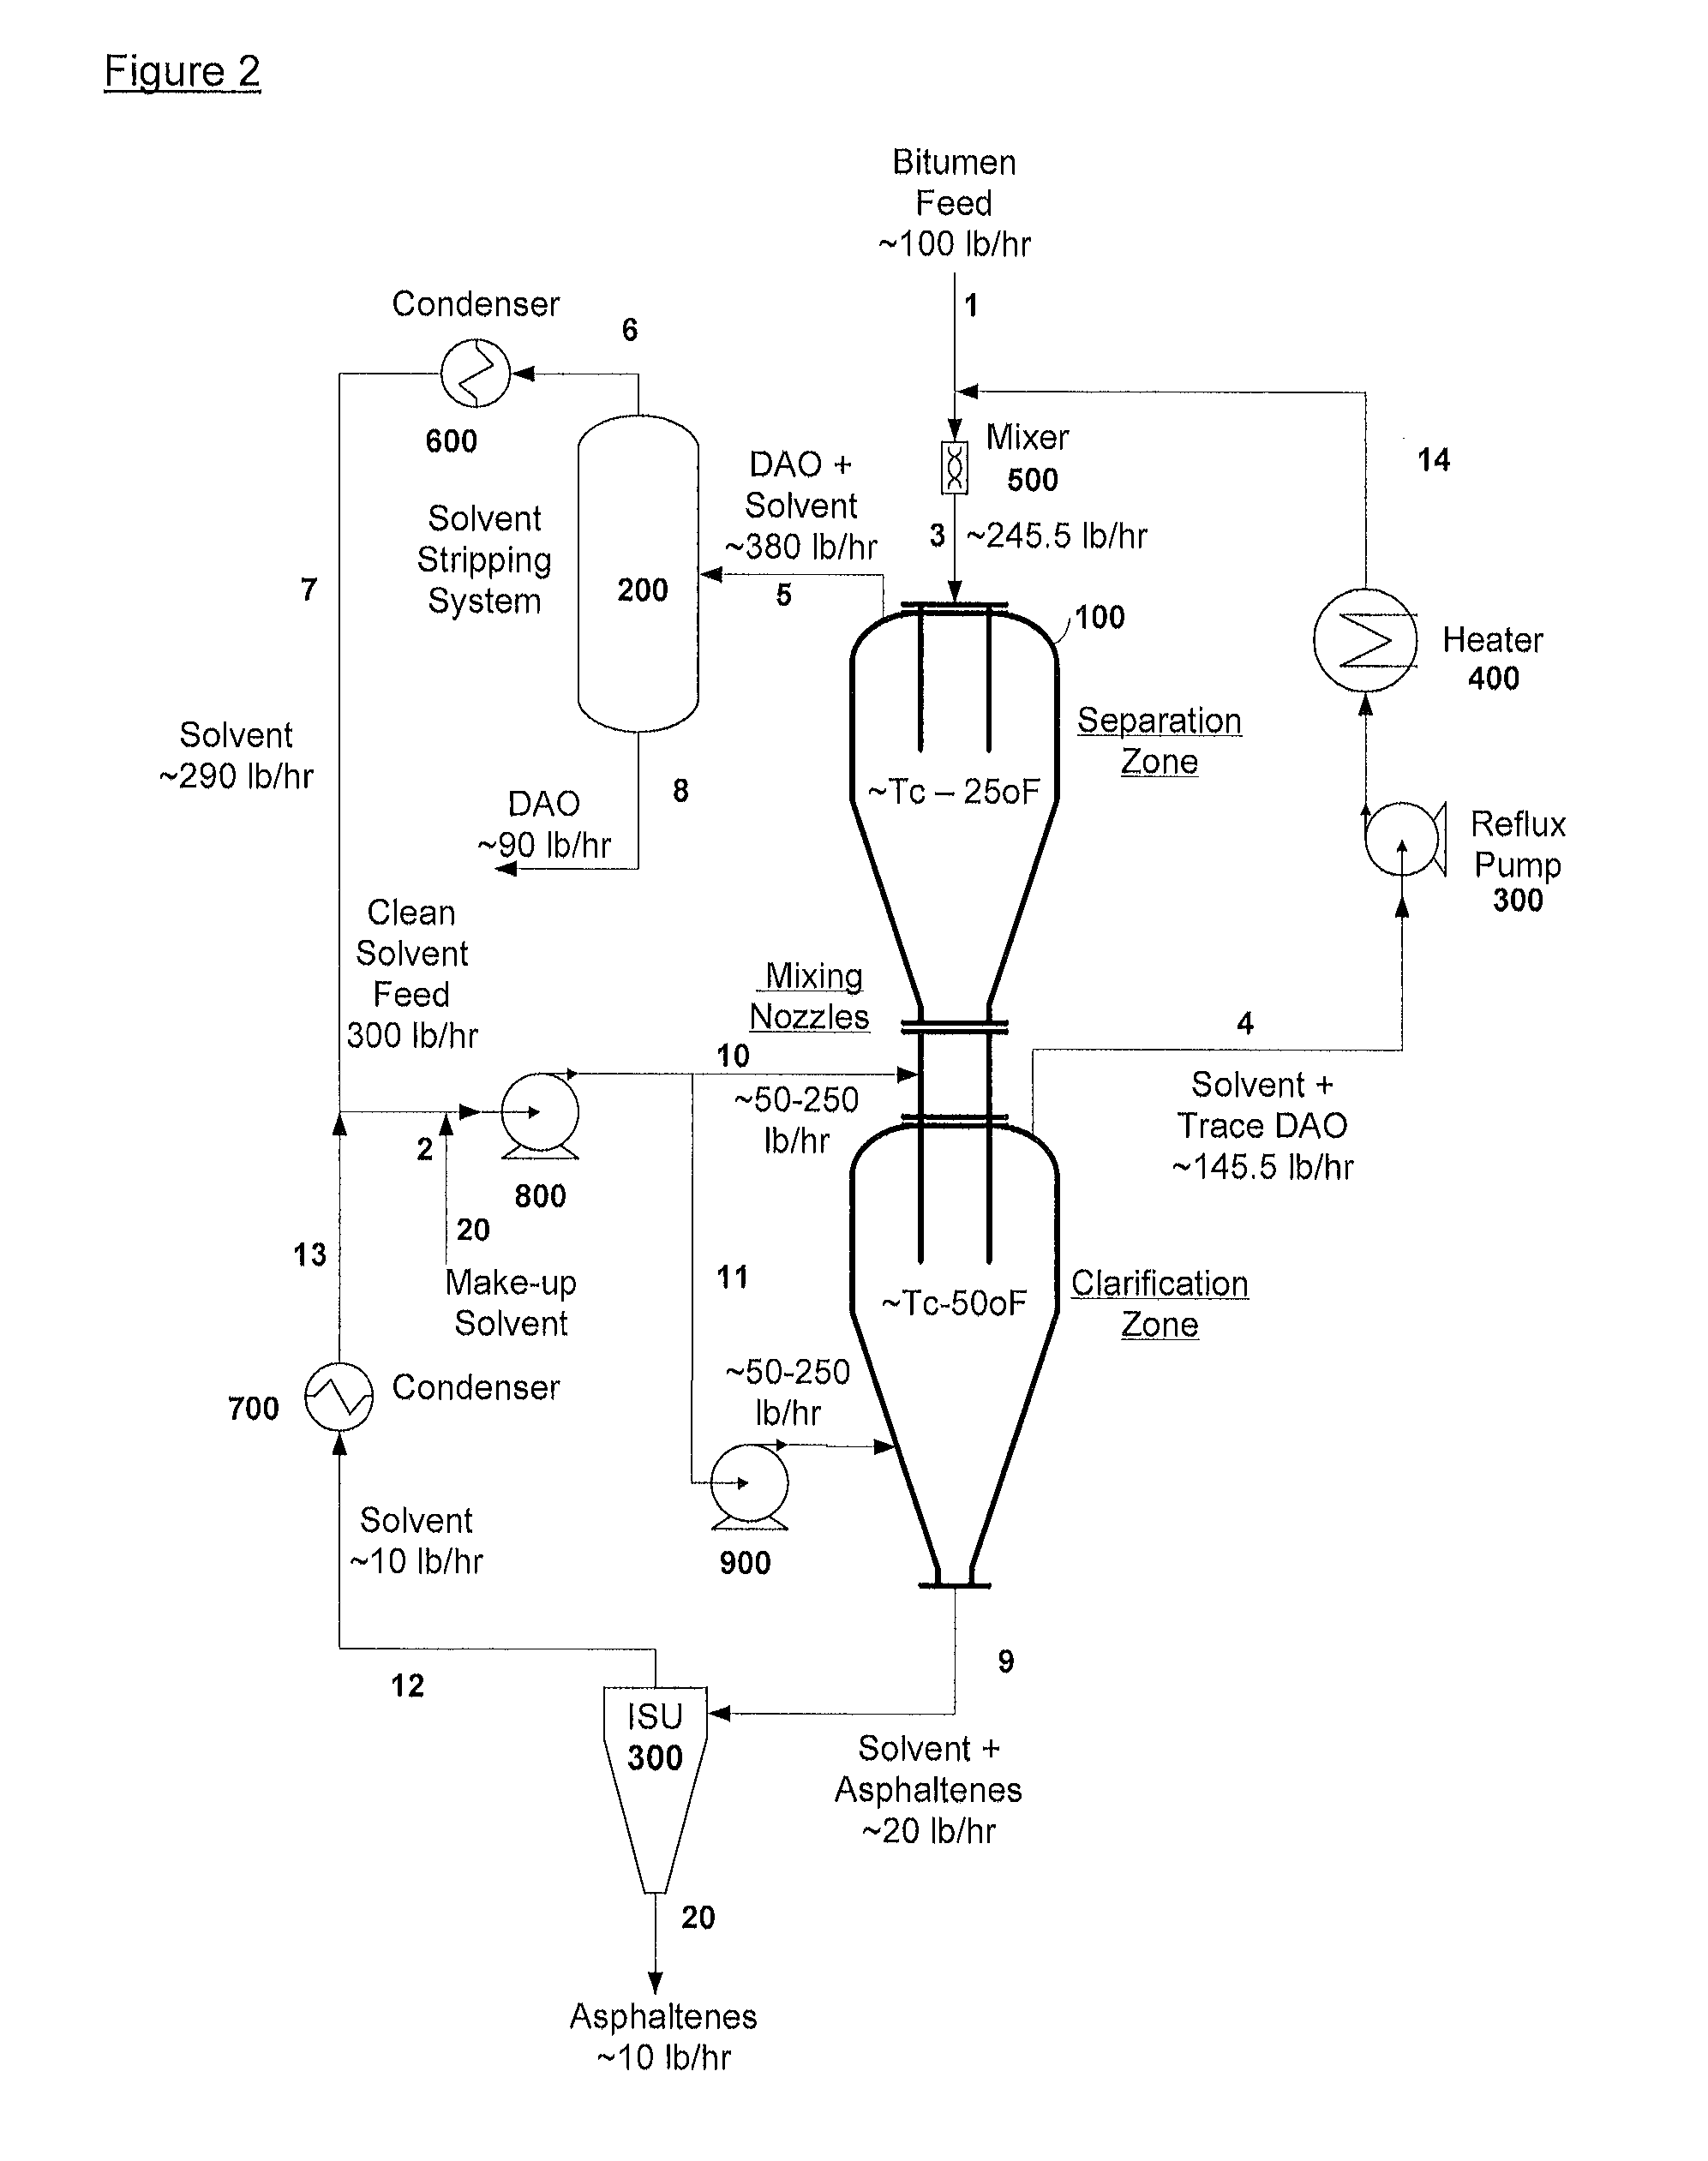 Separation of solid asphaltenes from heavy liquid hydrocarbons using novel apparatus and process ("ias")